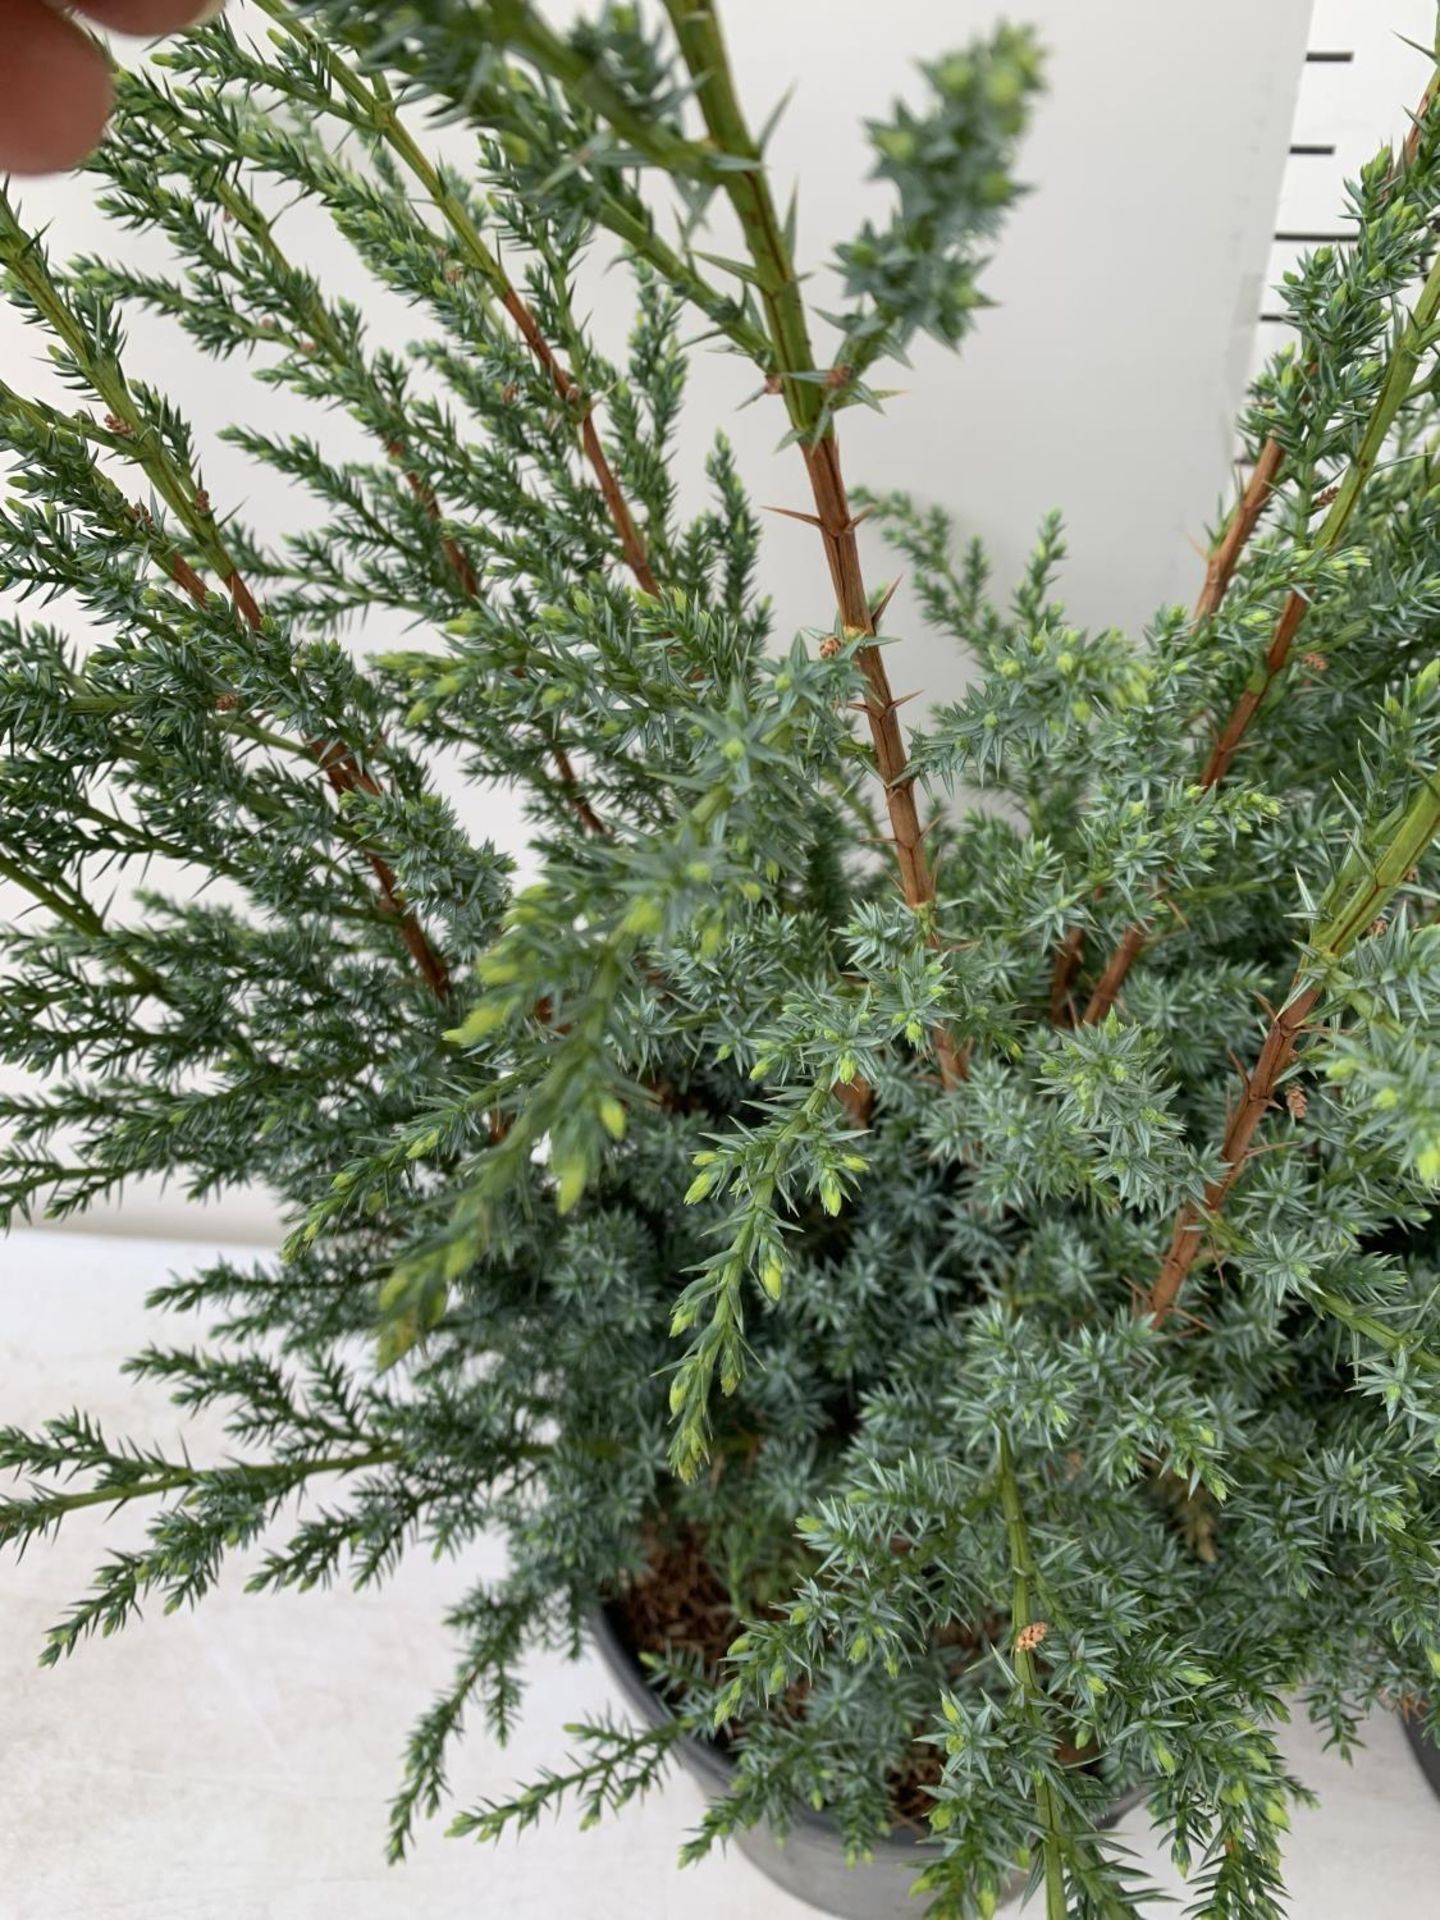 TWO JUNIPERUS CHINENSIS BLUE ALPS IN 7 LTR POTS A METRE IN HEIGHT PLUS VAT TO BE SOLD FOR THE TWO - Image 5 of 11